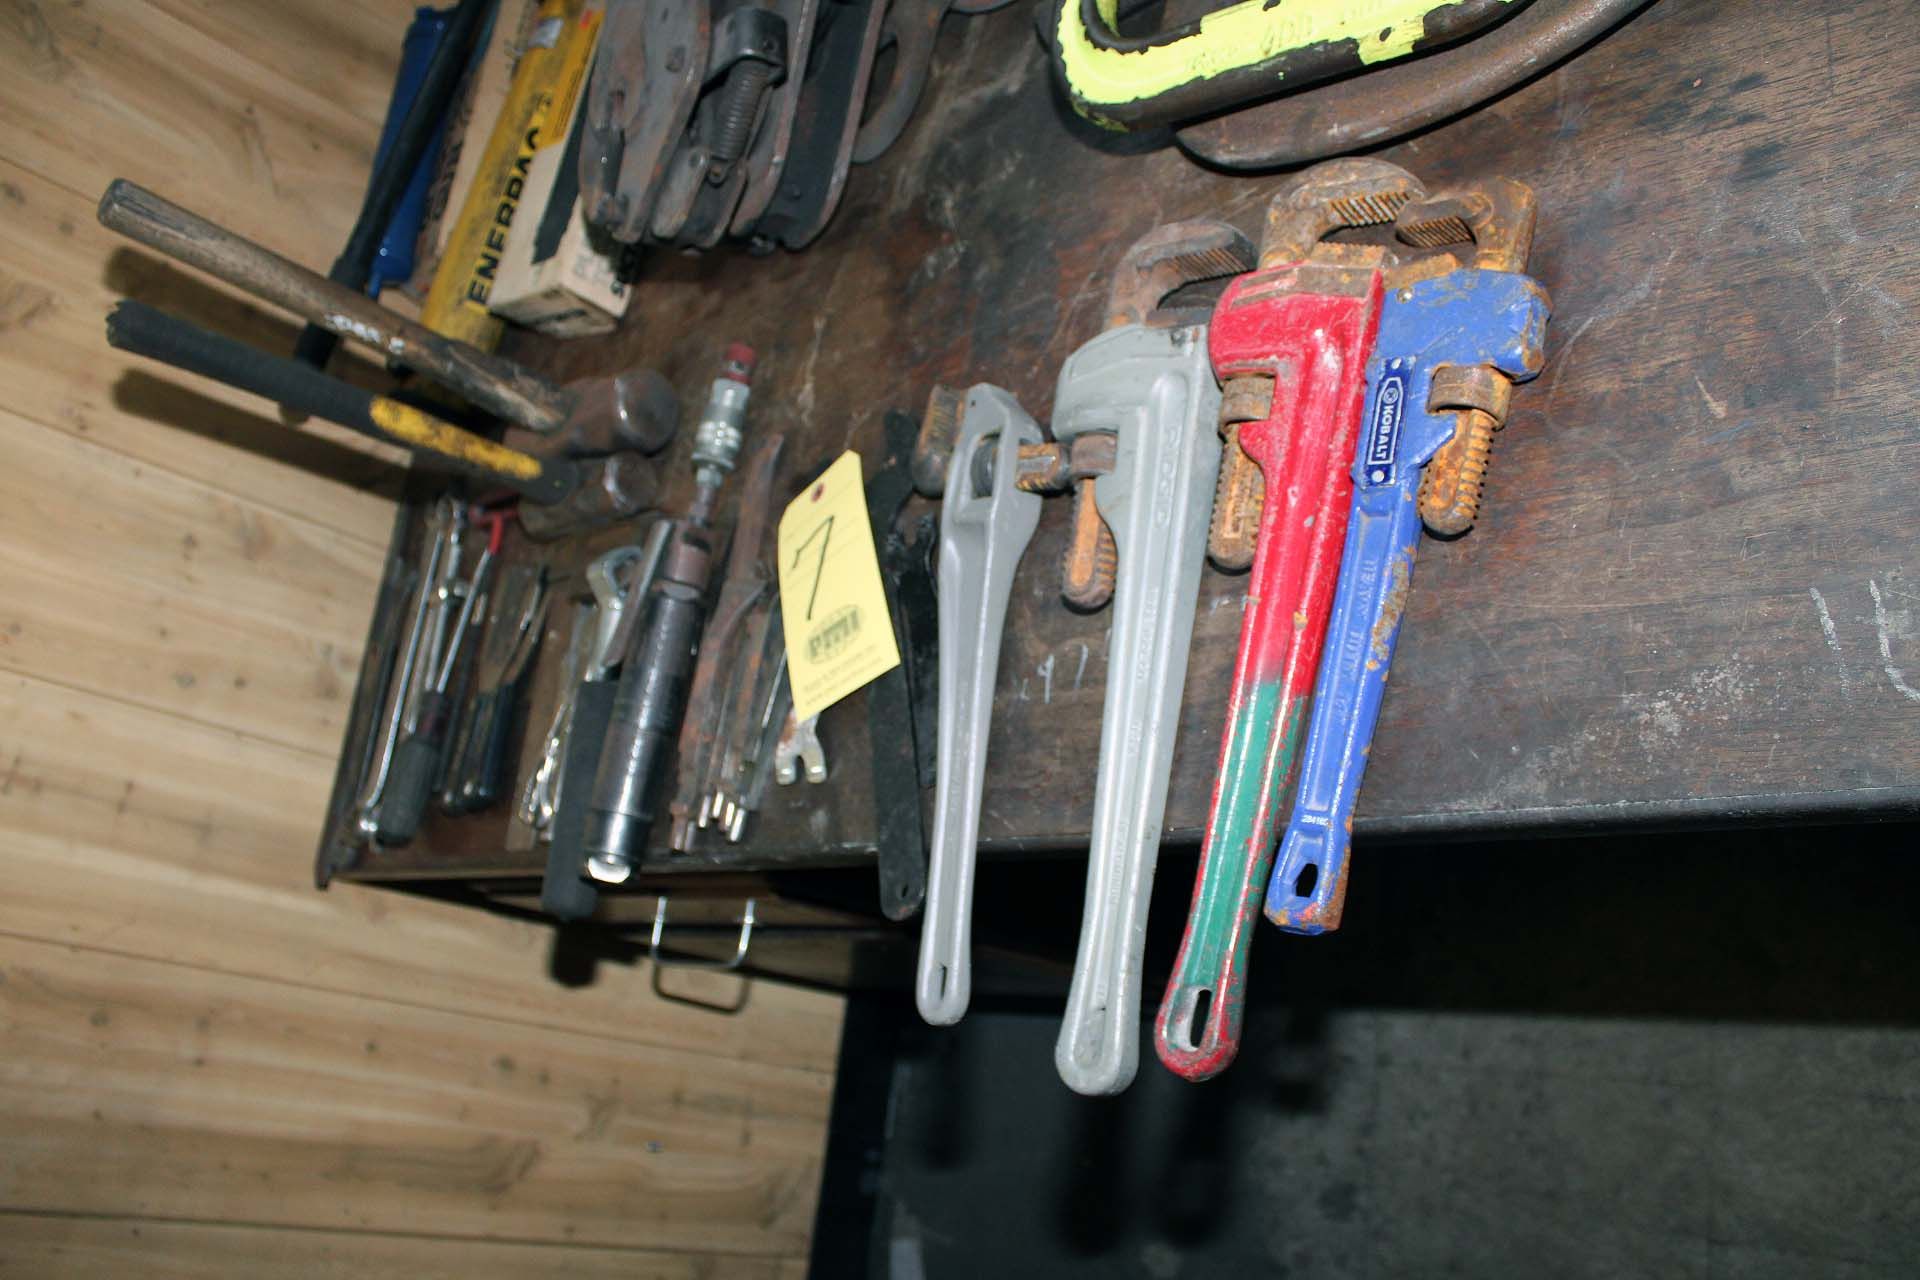 LOT CONSISTING OF: (4) pipe wrenches, (2) C-clamps, (1) chisel scaler w/chisels, hammers, wrenches &